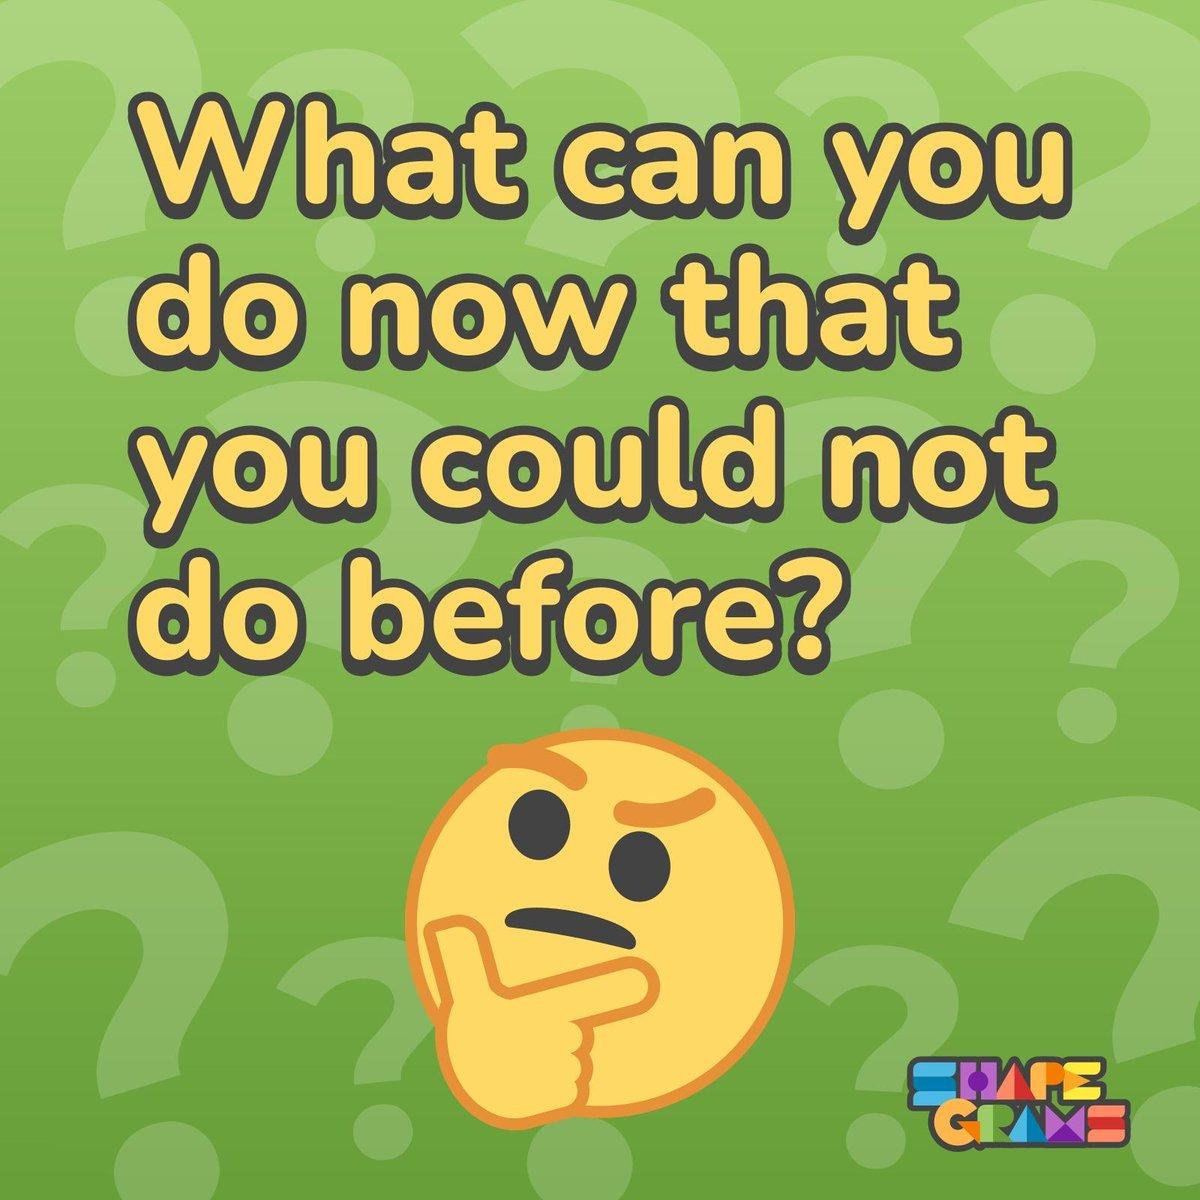 A good question to ask students after they've worked on a Shapegram is...

&quot;What can you do now that you couldn't do before?&quot; 

#Shapegrams #Teaching #ArtTeacher #EdTech